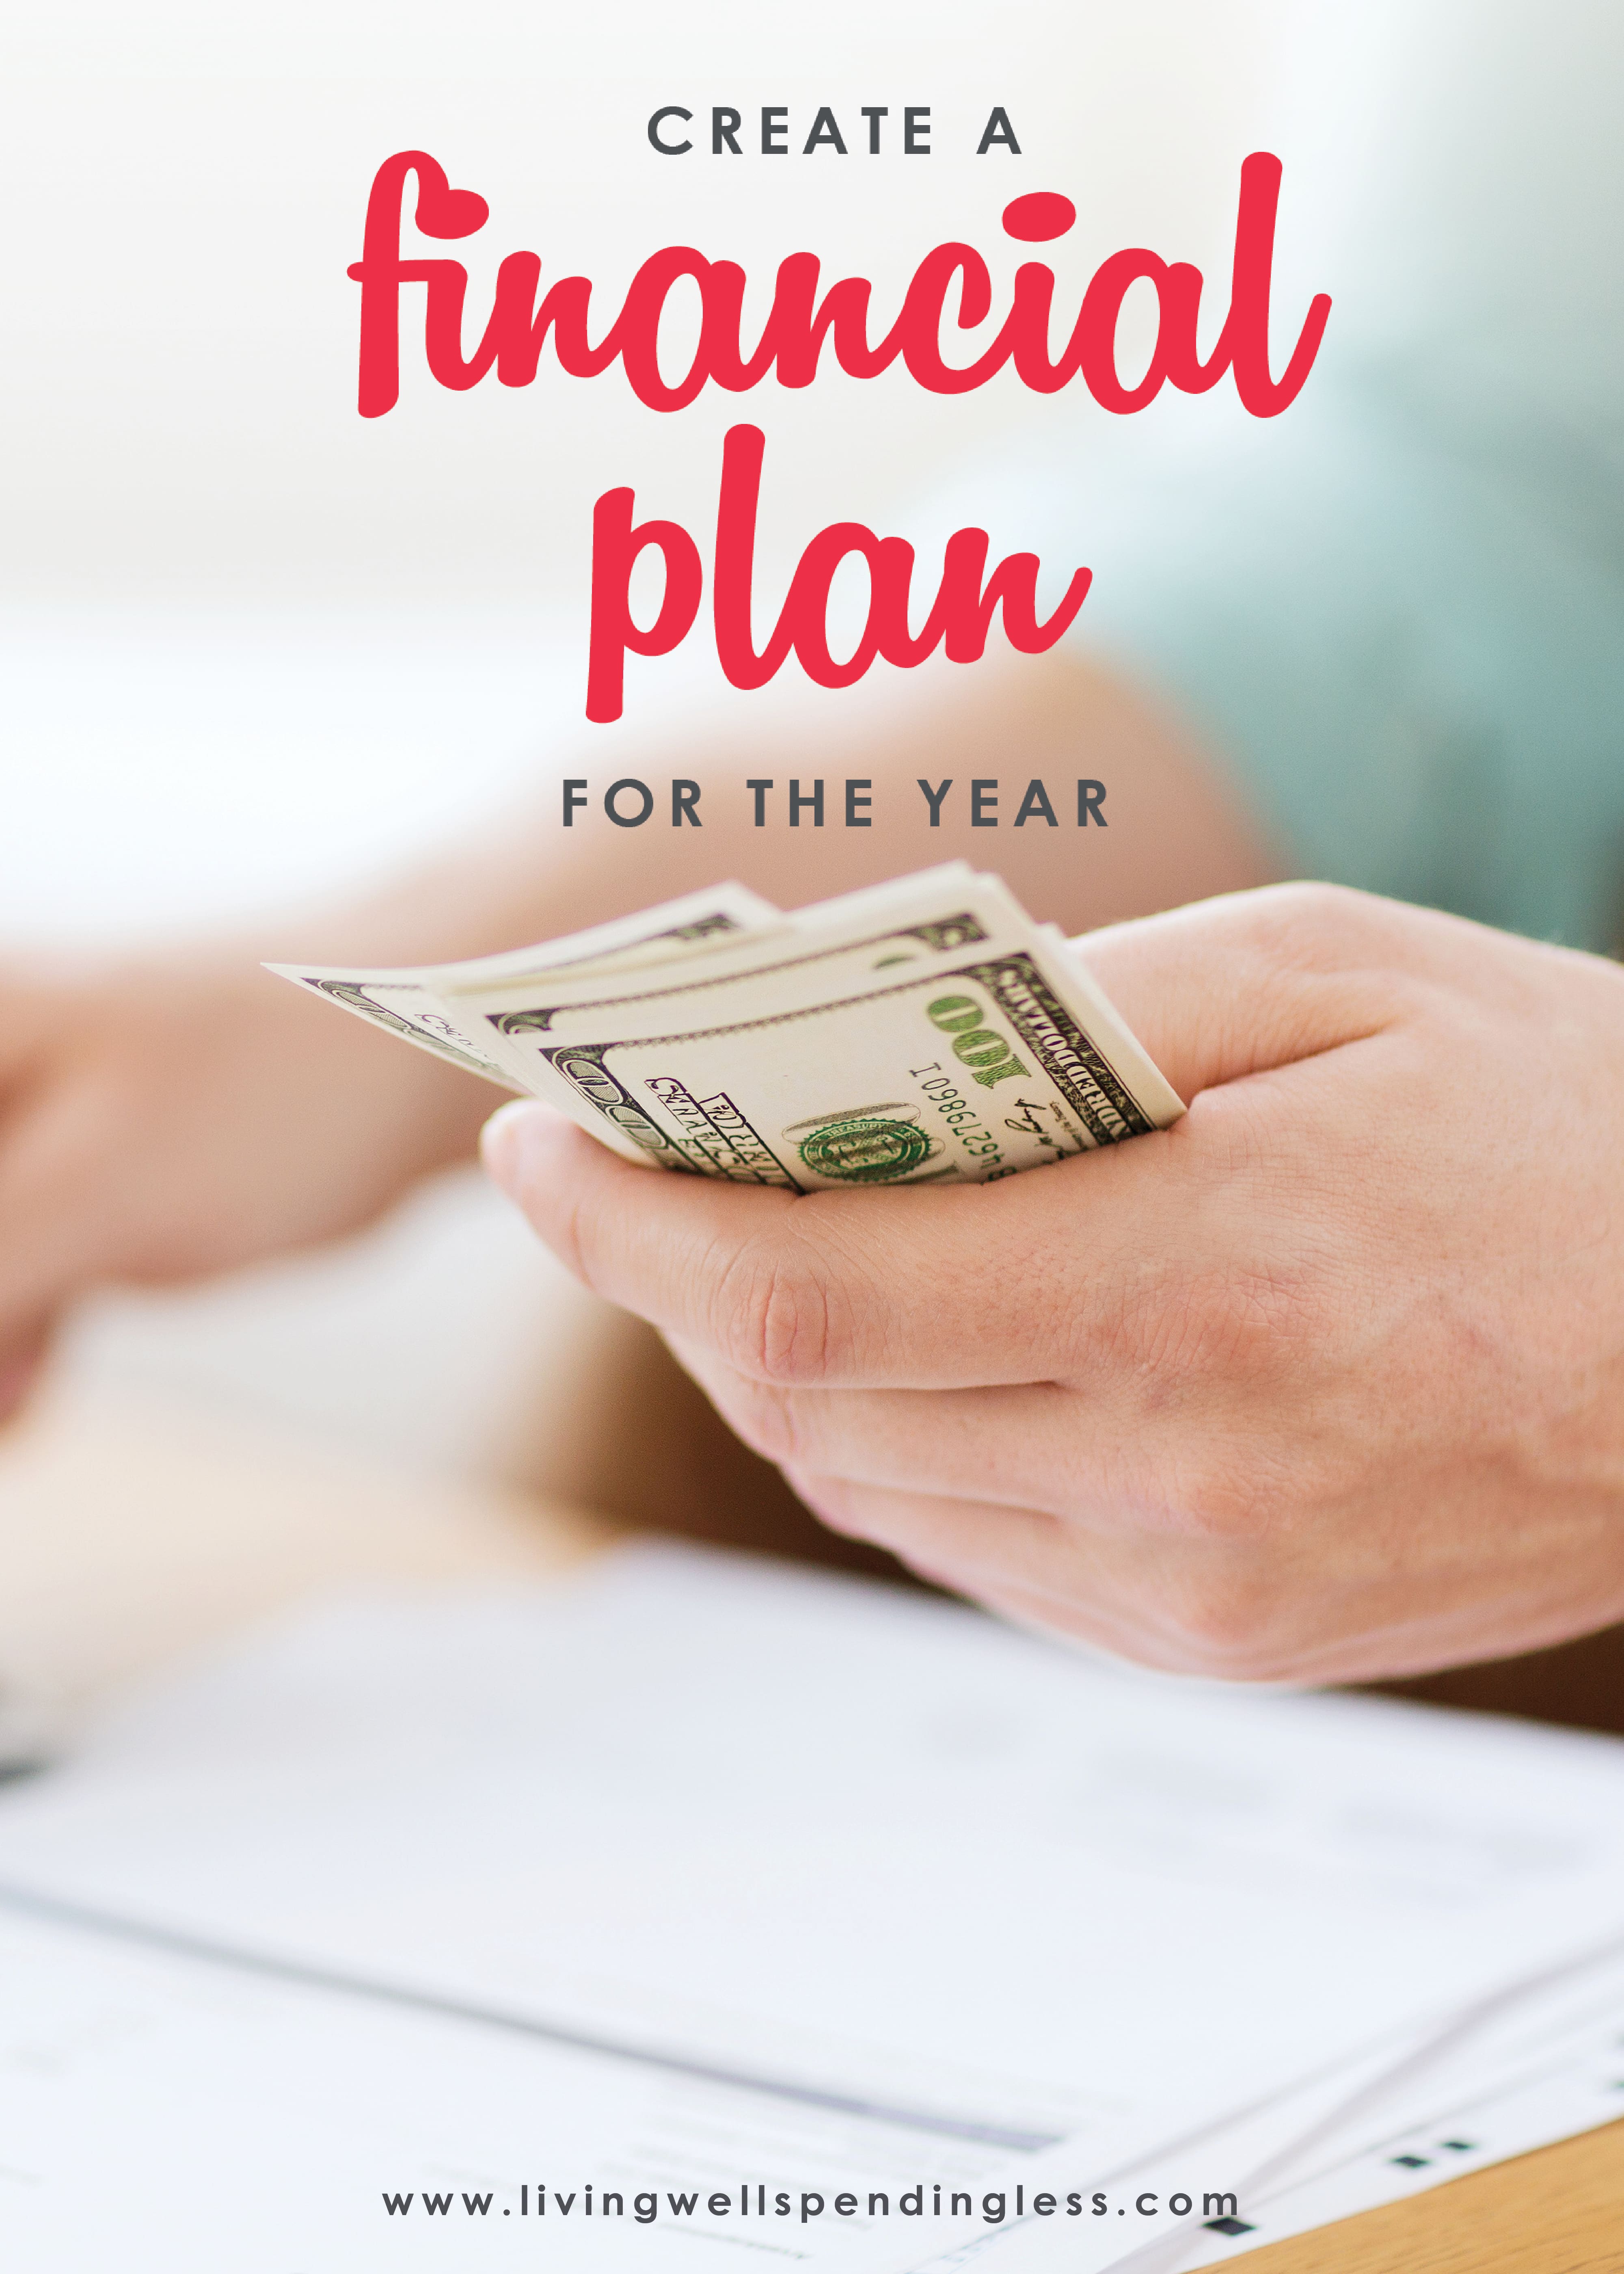 January is a month of new beginnings and resolutions. Aim for financial success this year with this super-easy 3-step financial action plan for January.